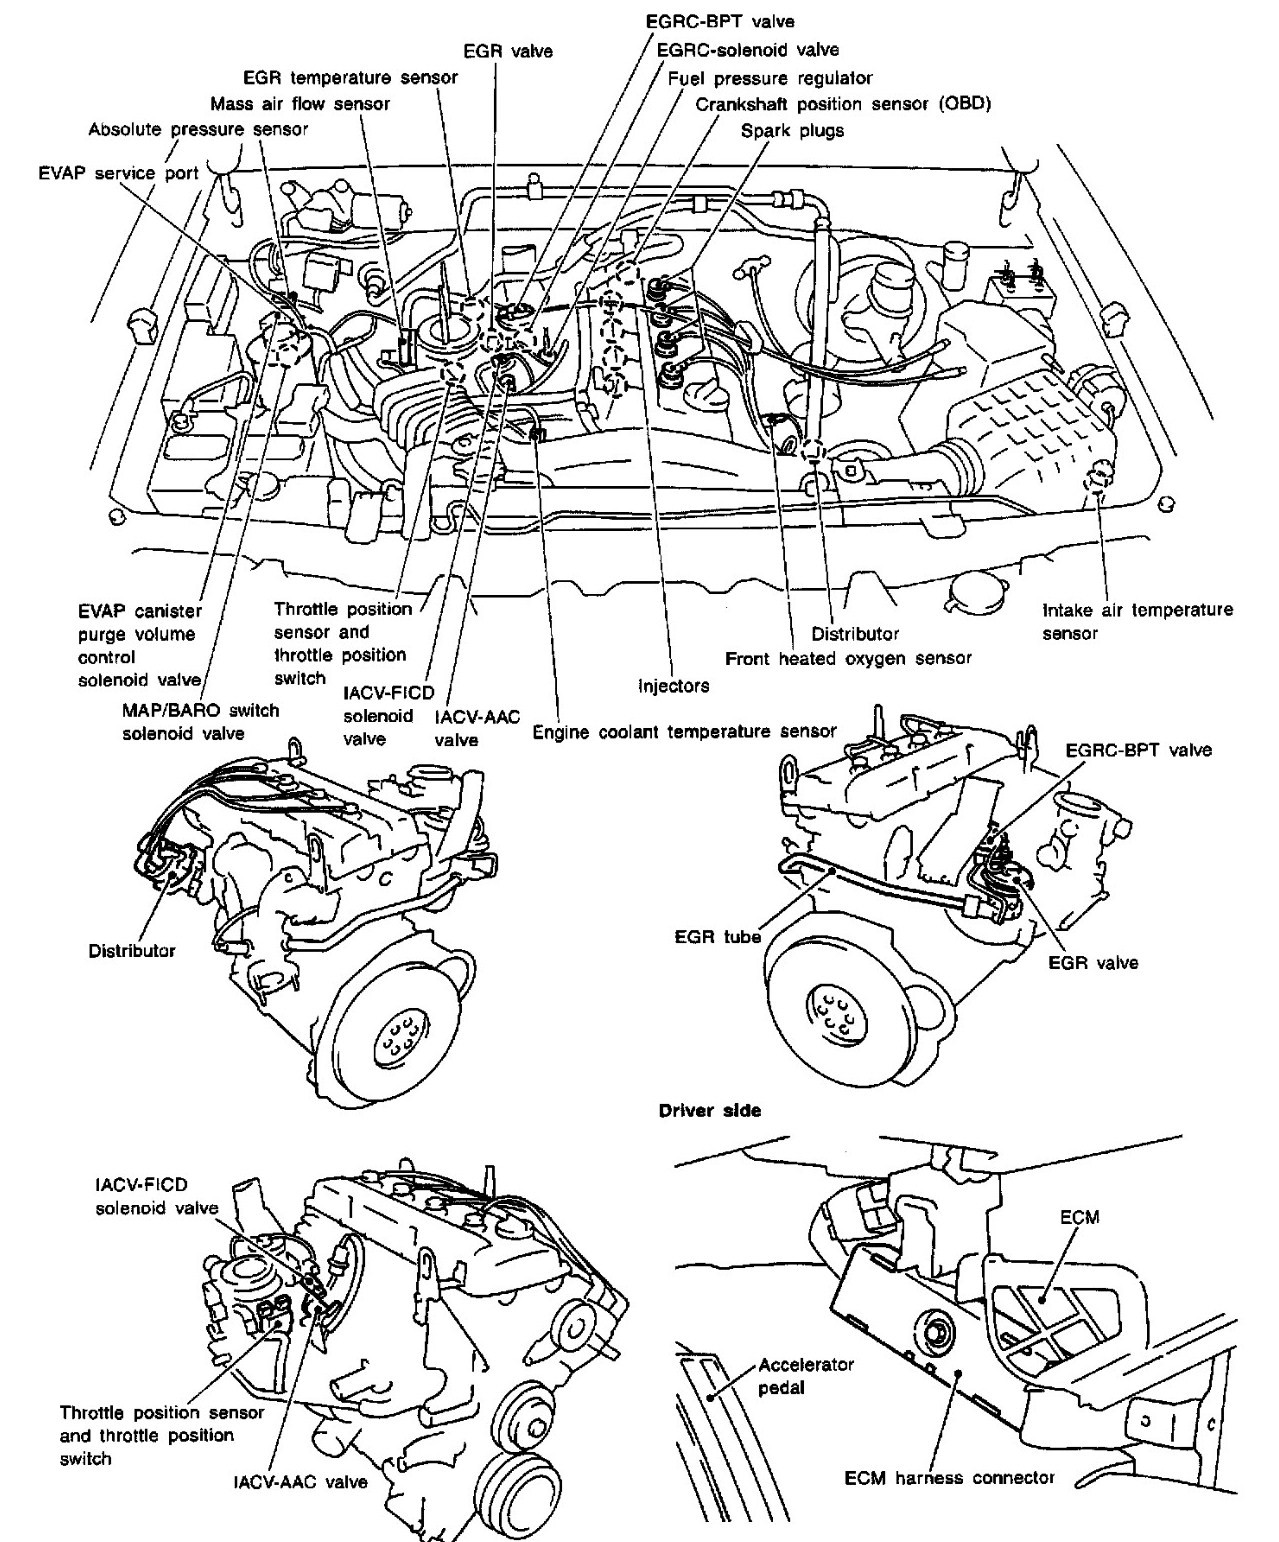 Nissan Frontier Engine Diagram My 2000 Nissan Frontier 2 4l Manual Trans when In Between Shifts Of Nissan Frontier Engine Diagram